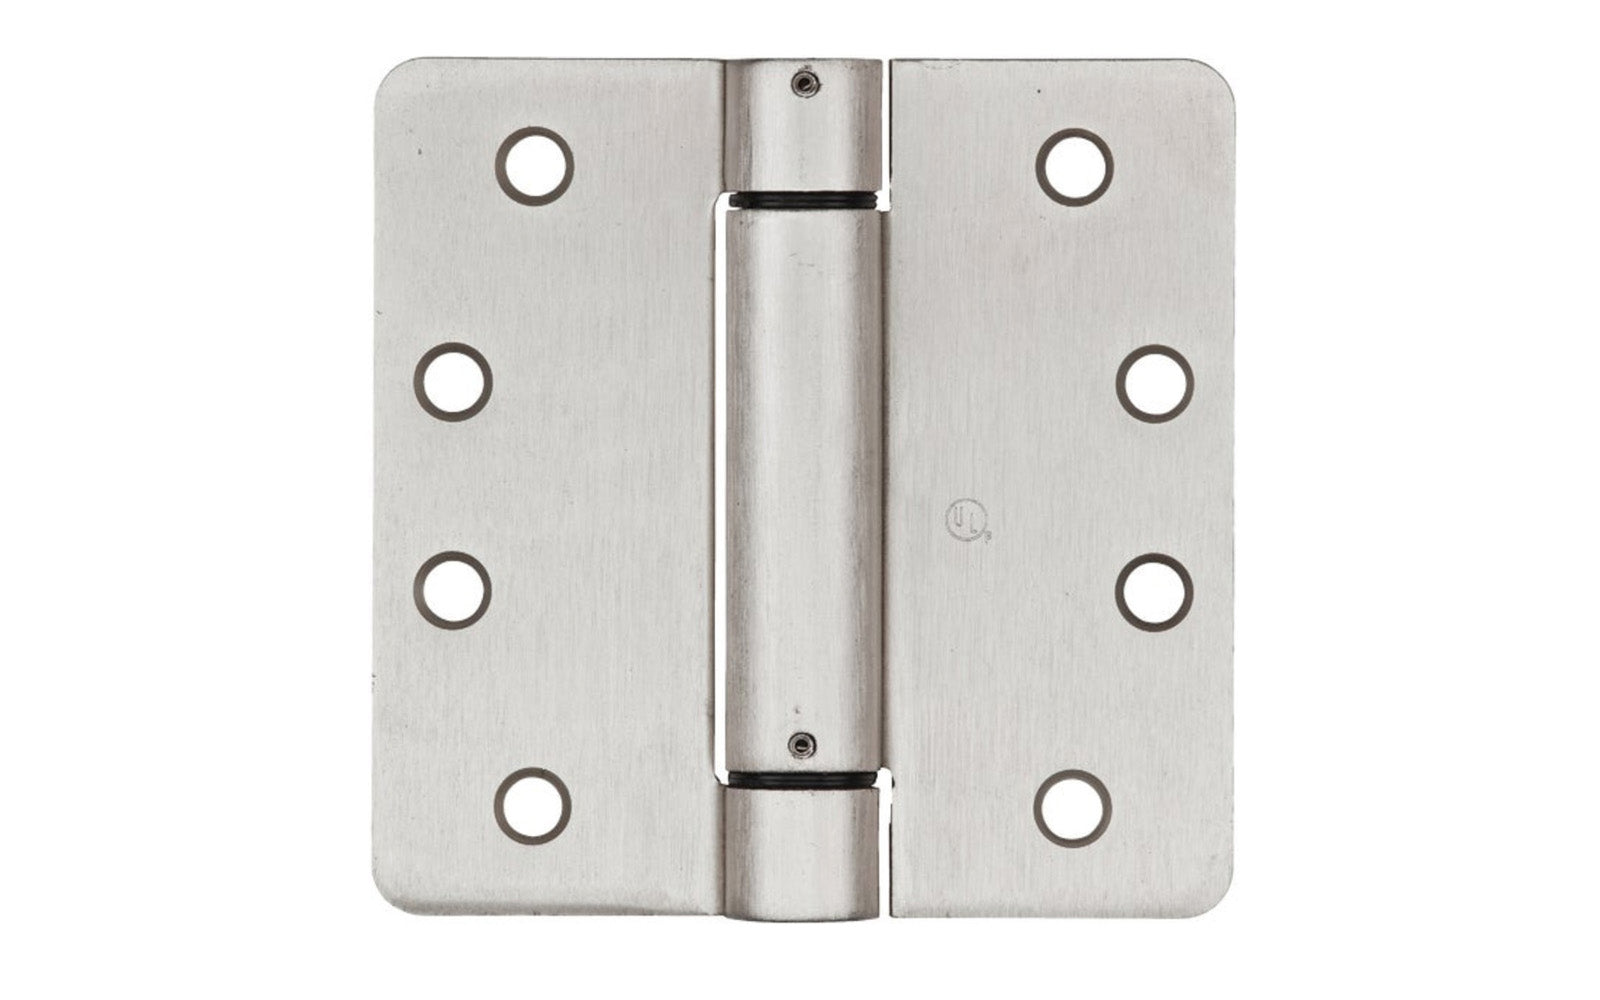 This 4" Satin Nickel Finish Spring Hinge is designed for hanging self-closing doors in basements, stairways, garages, & entrances, etc. Can be used in residential, commercial, & apartment buildings. Hinge is UL approved for fire doors. Closing speed is adjustable. Fits standard hinge cutout. 1/4" radius, round corner automatic door-closing spring hinge. Sold as a single hinge in pack.  National Hardware Model No. N350-868.